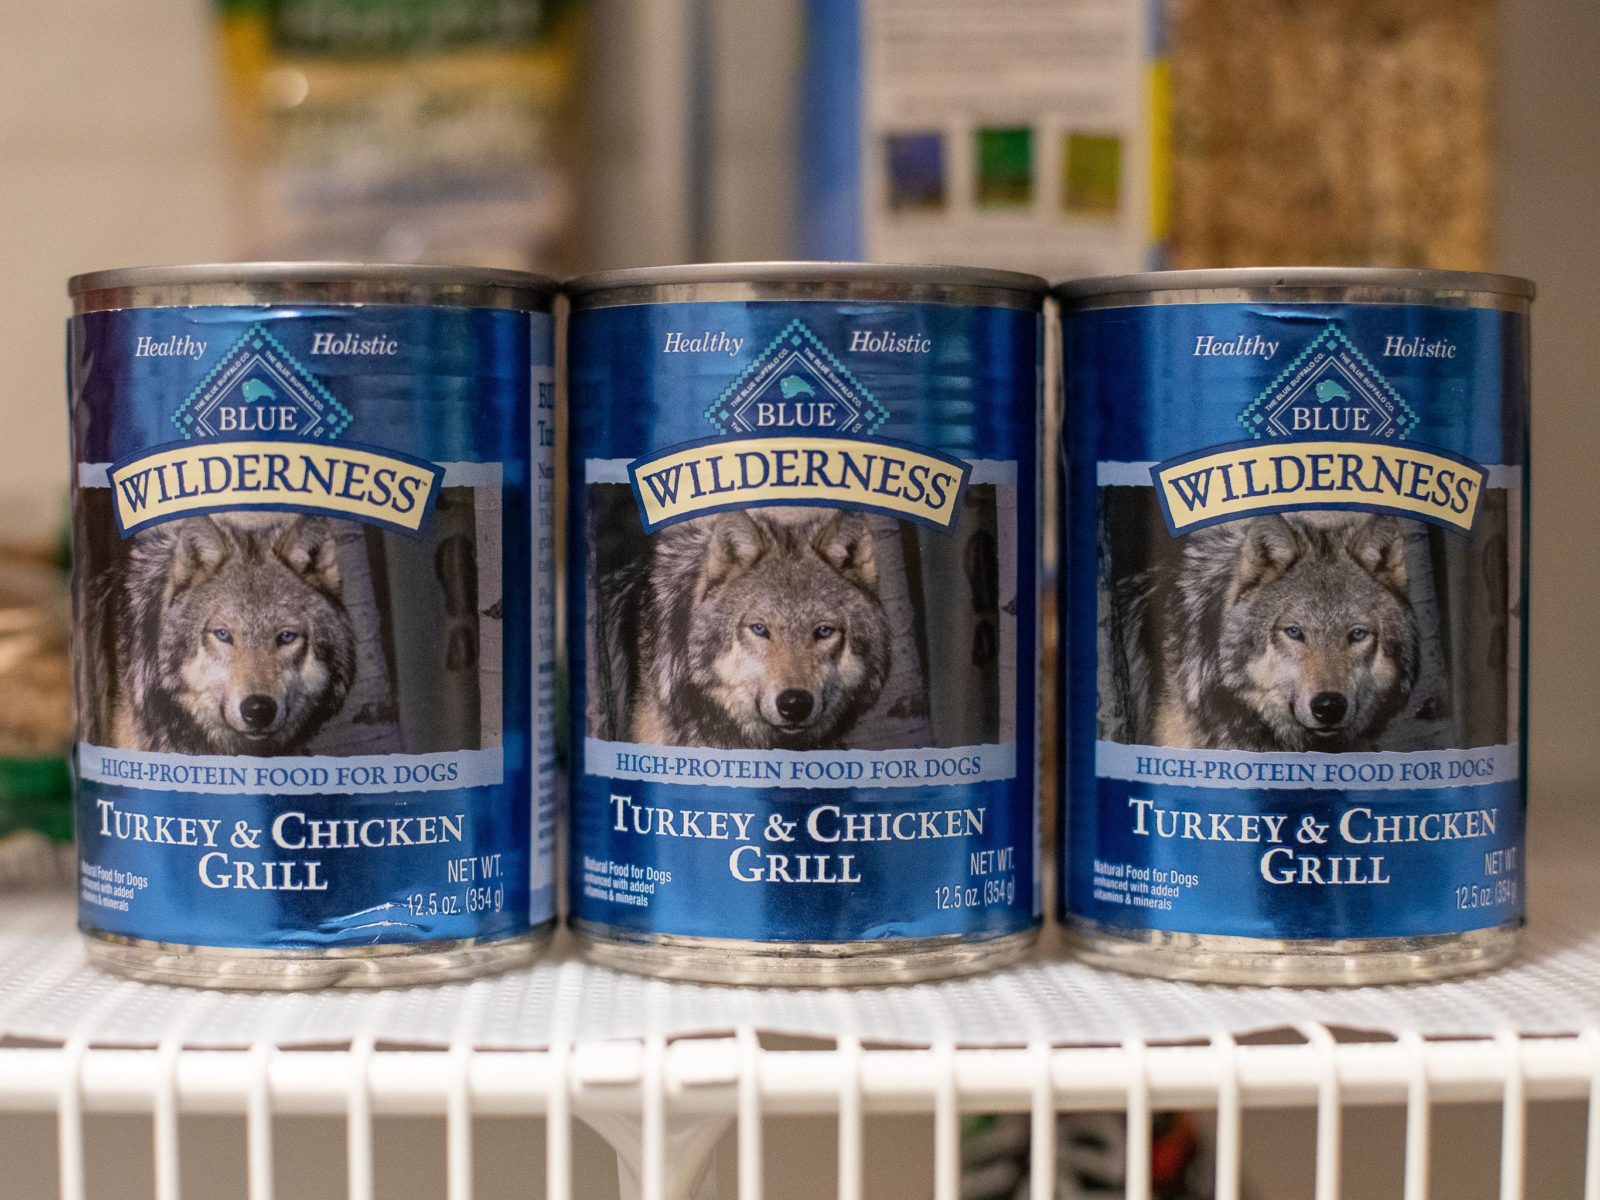 Blue Wilderness Dog Food As Low As 75¢ Per Can At Publix on I Heart Publix